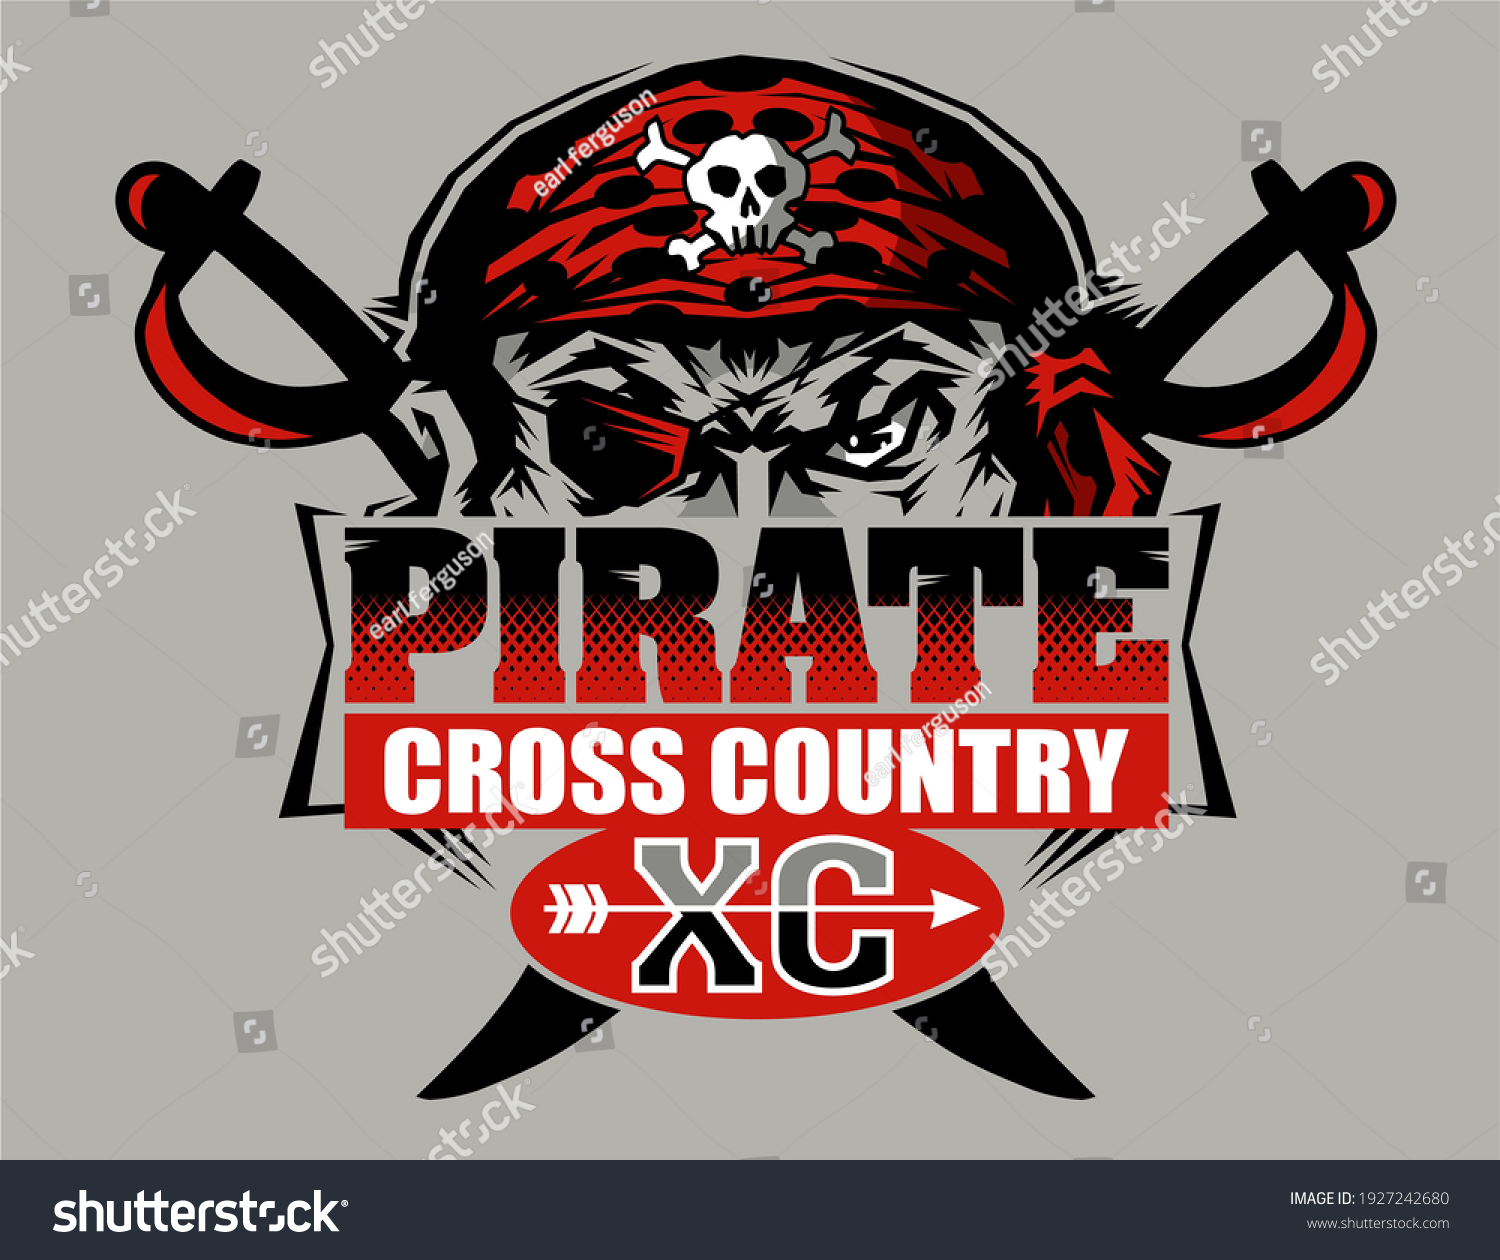 SVG of pirate cross country team design with half mascot for school, college or league svg